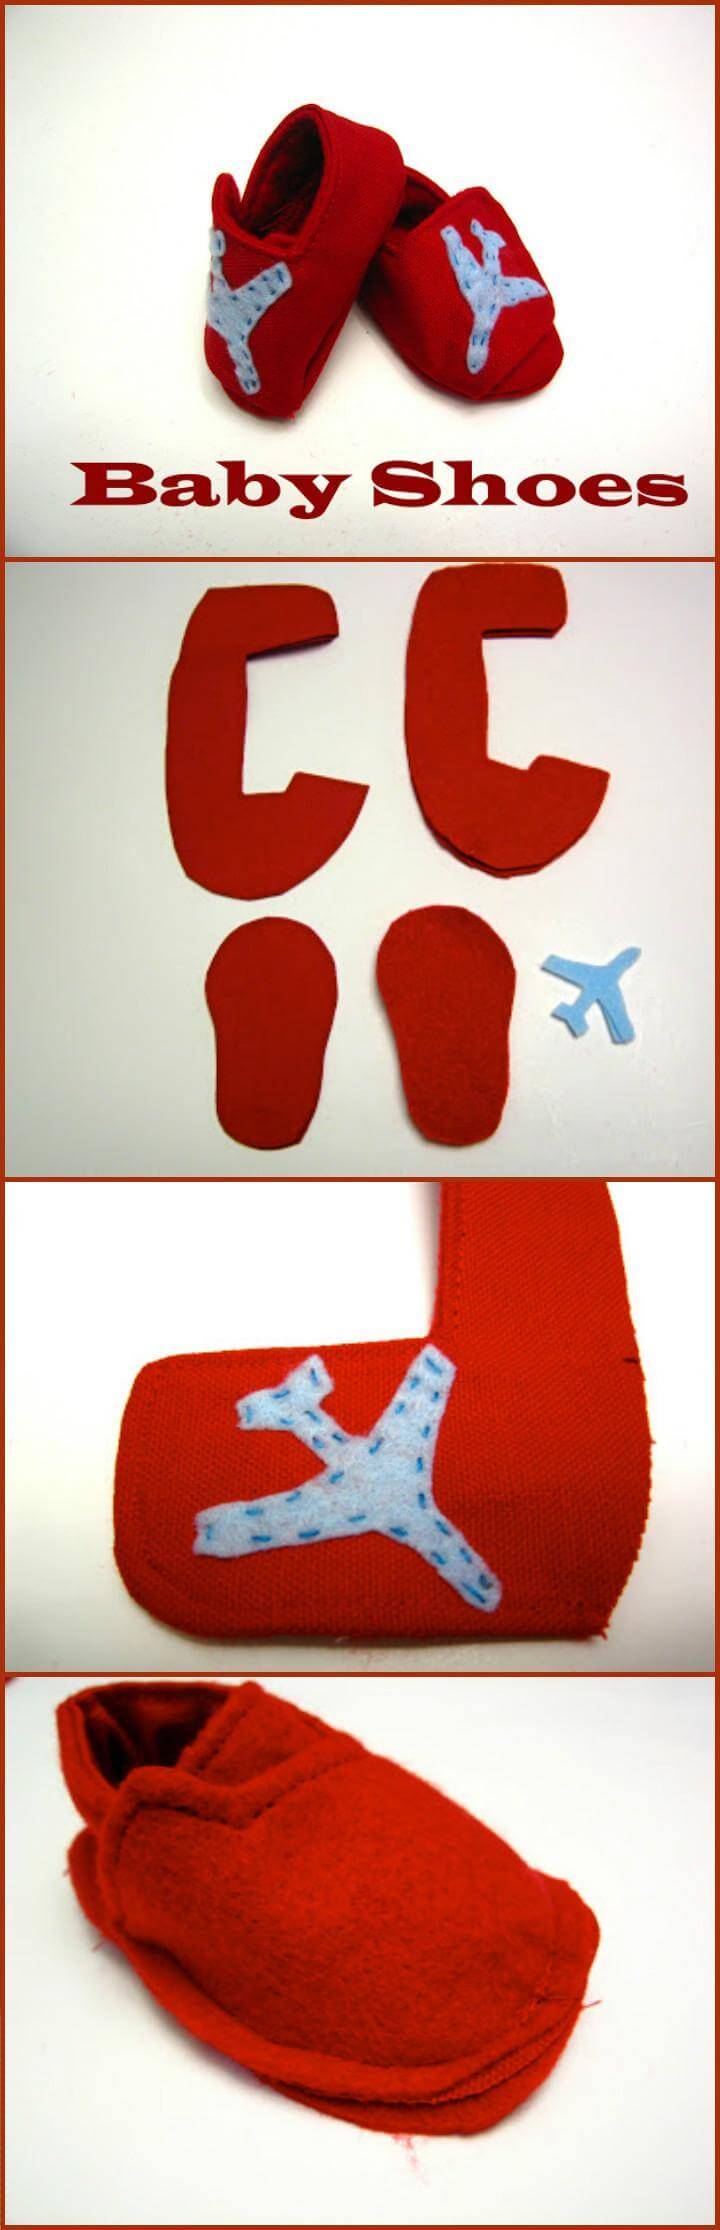 handmade red baby shoes with plane embellishment